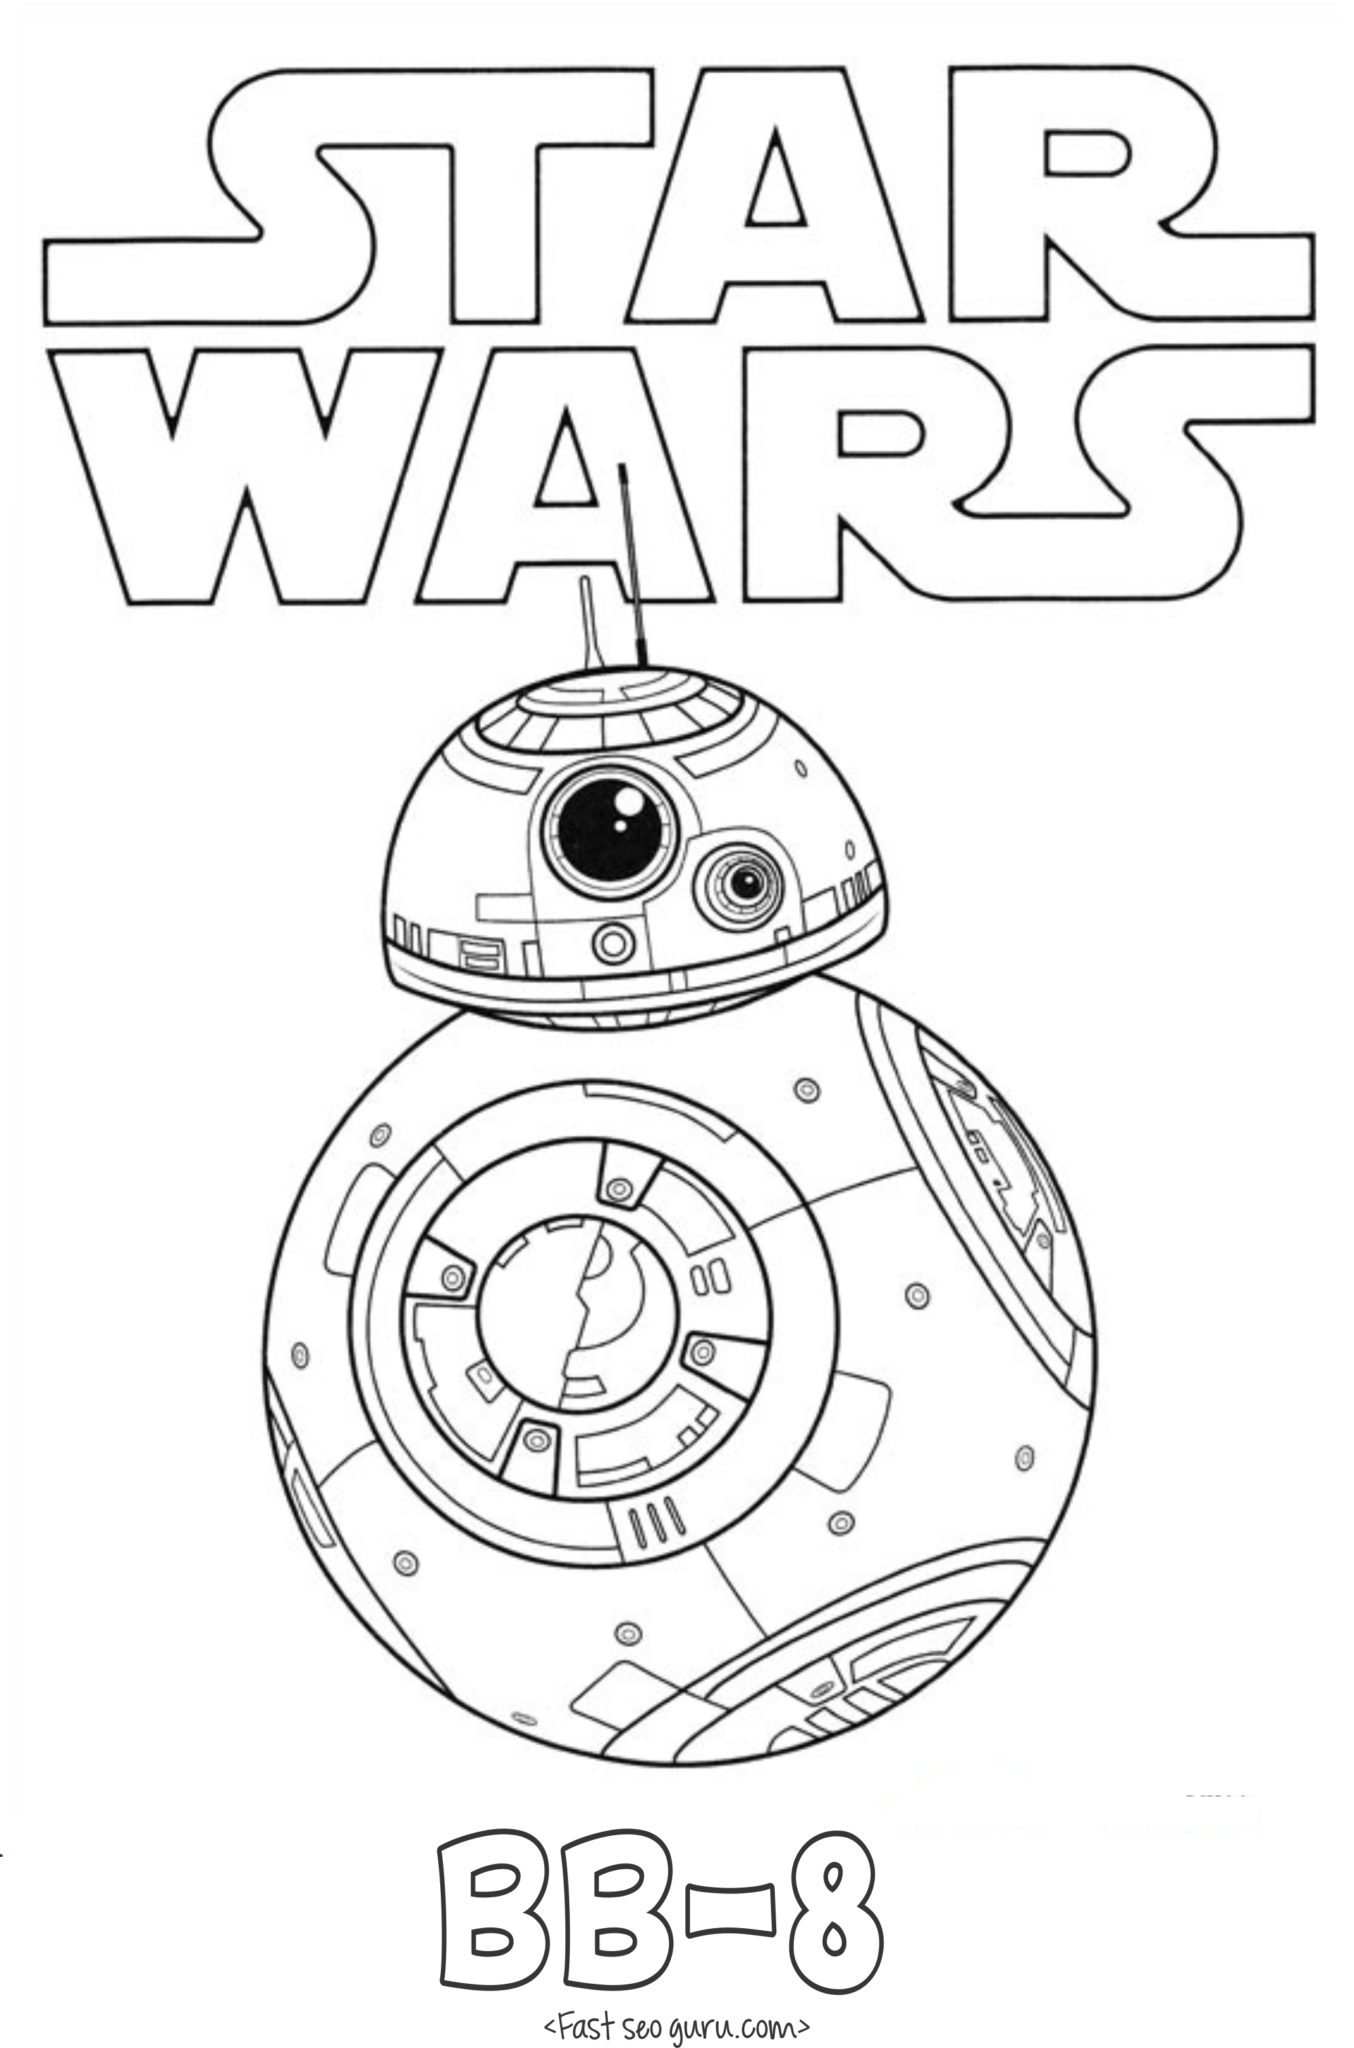 Star Wars Printable Coloring Pages Pictures to pin on 